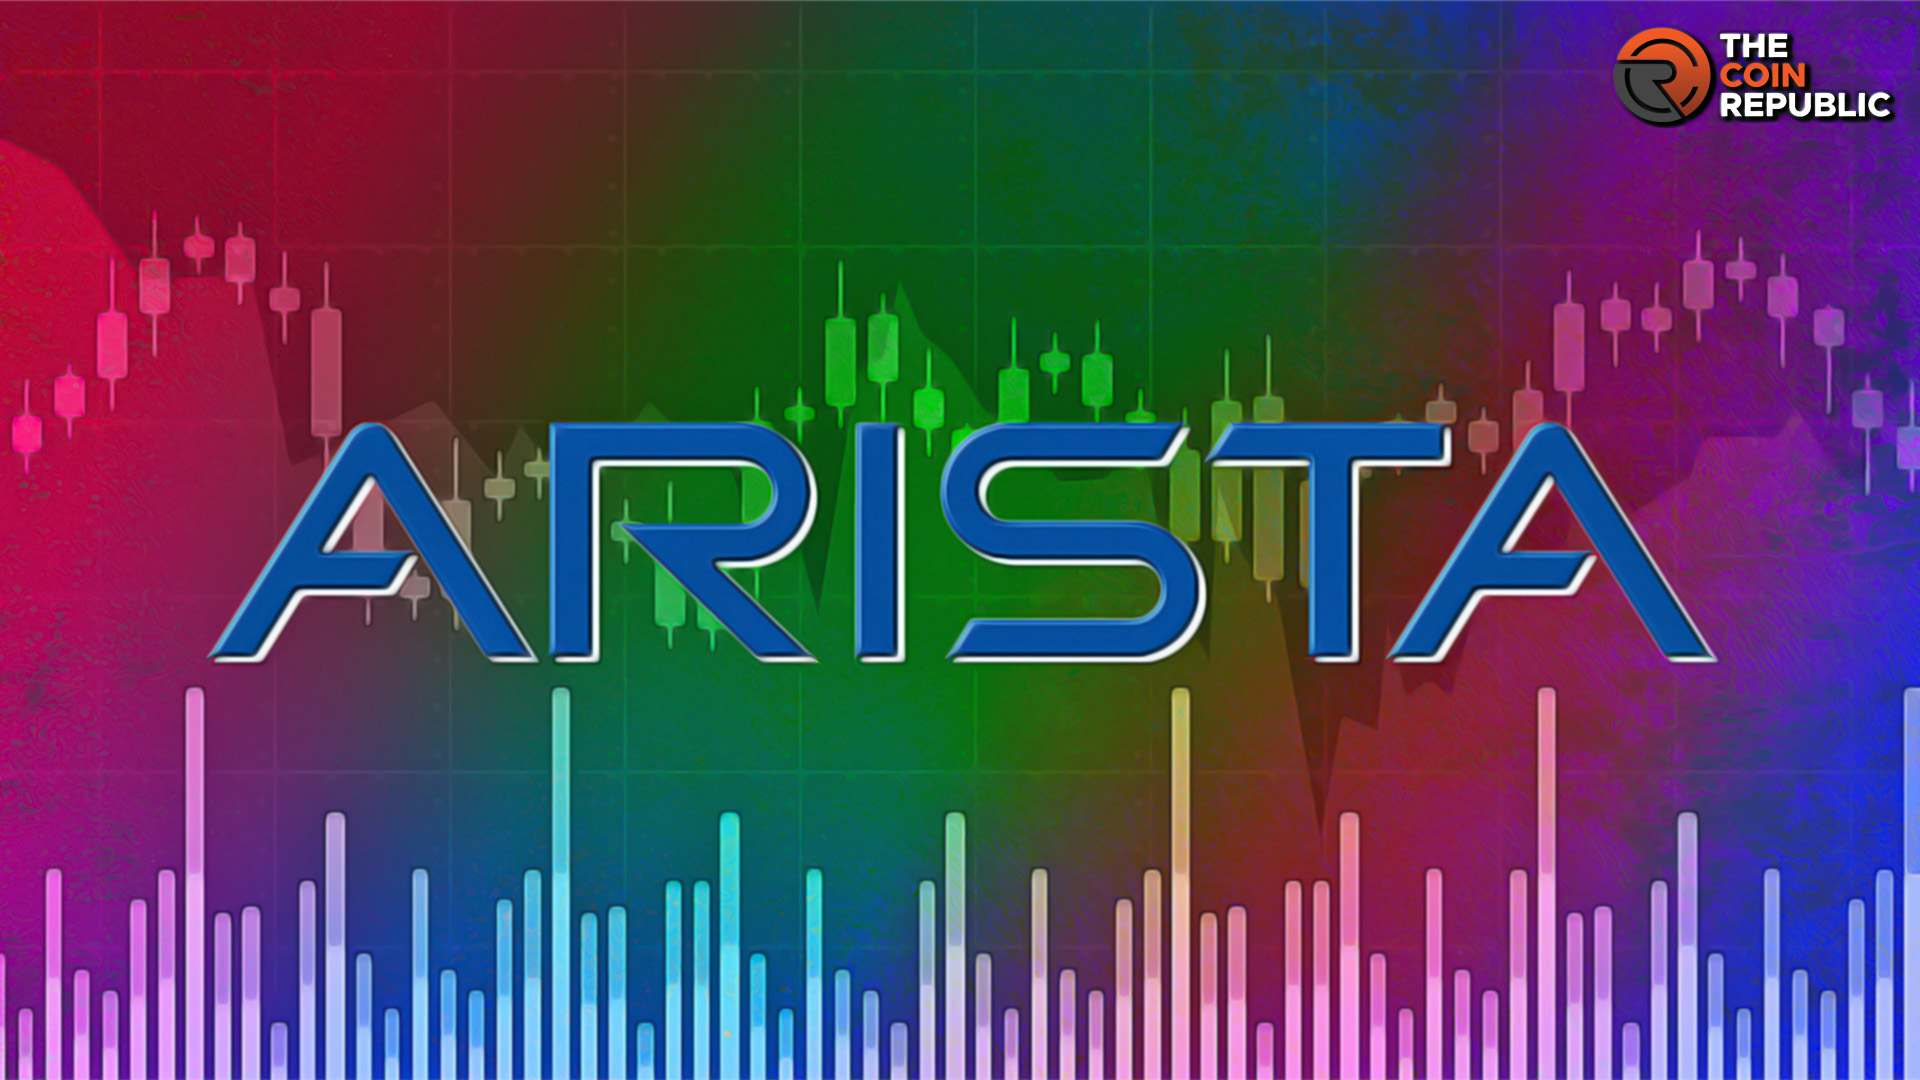 Arista Networks (ANET) Stock Price Attracting Active Bears